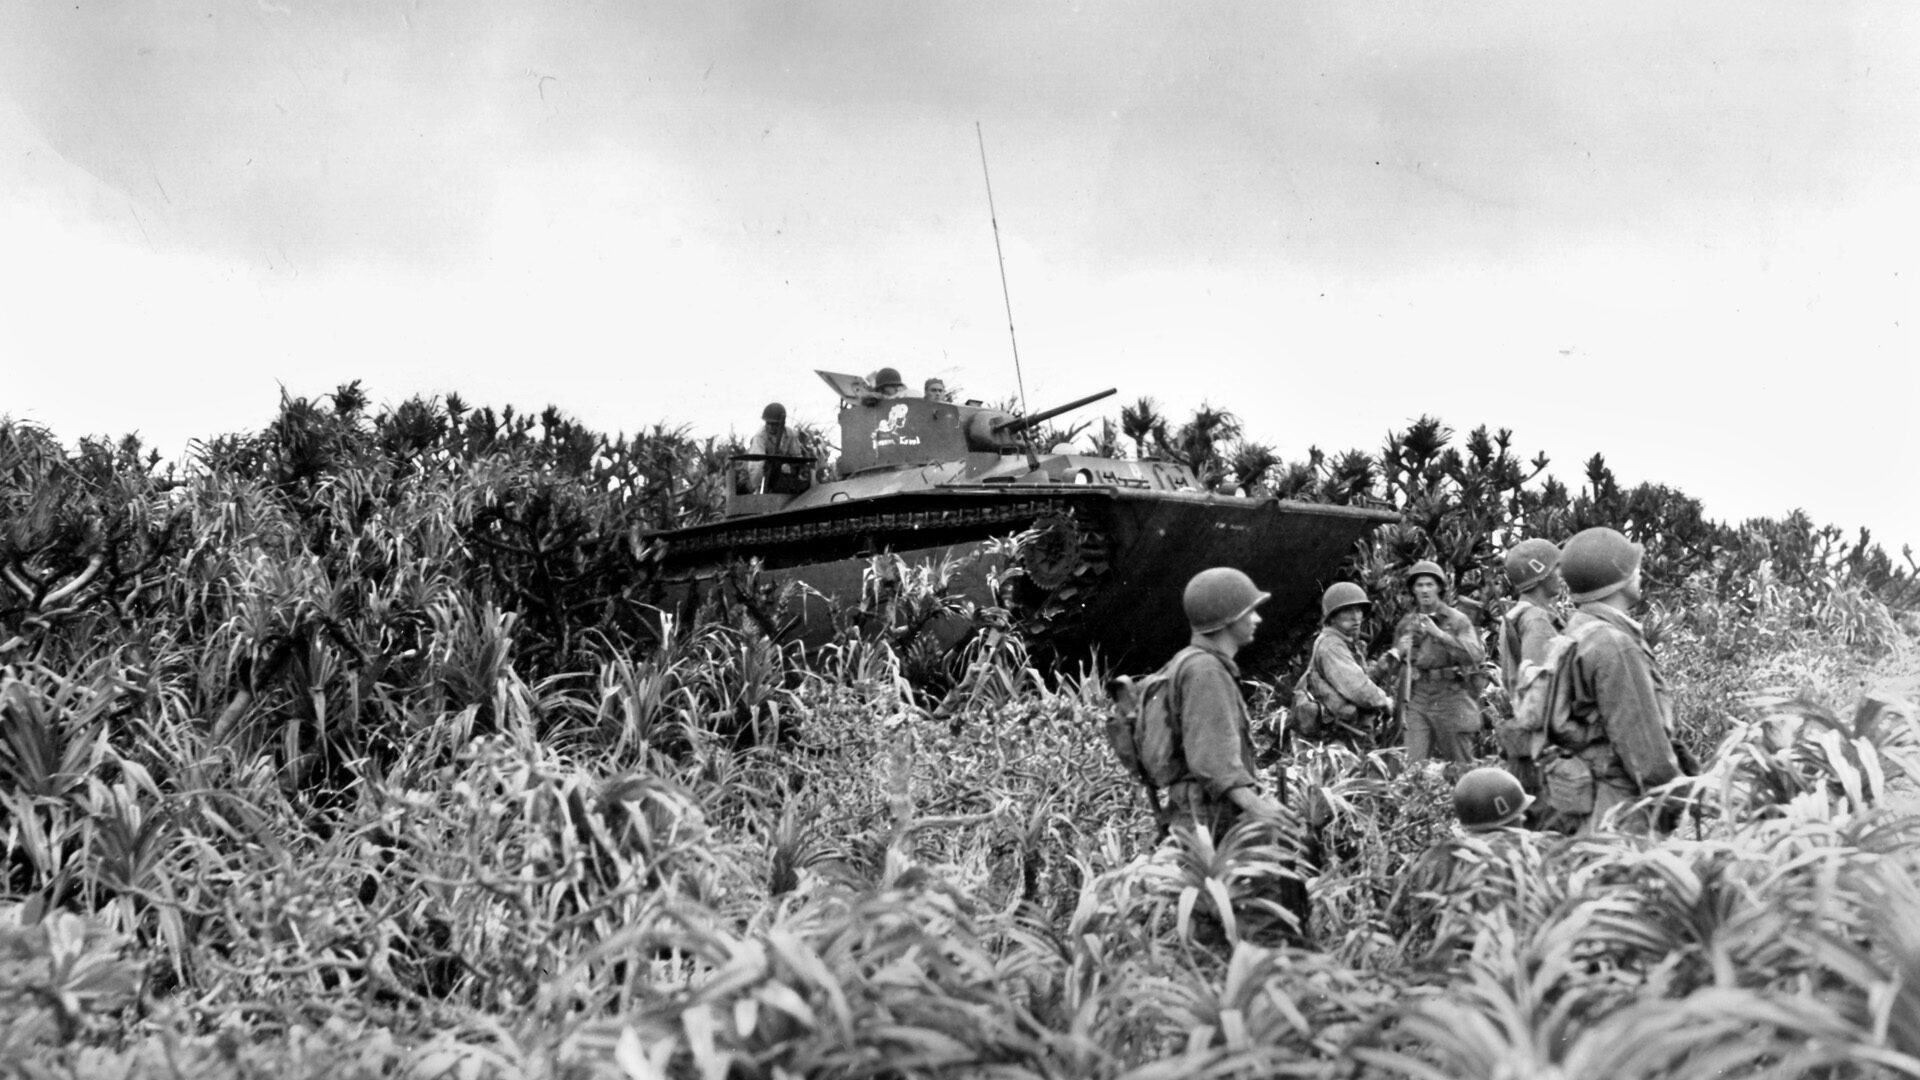 Amtracks cross Keise Shima supported by infantry of the 77th Division. Twenty-four 155mm artillery pieces of the 420th Field Artillery Group were brought ashore the tiny island and aimed at Okinawa only eight miles away.